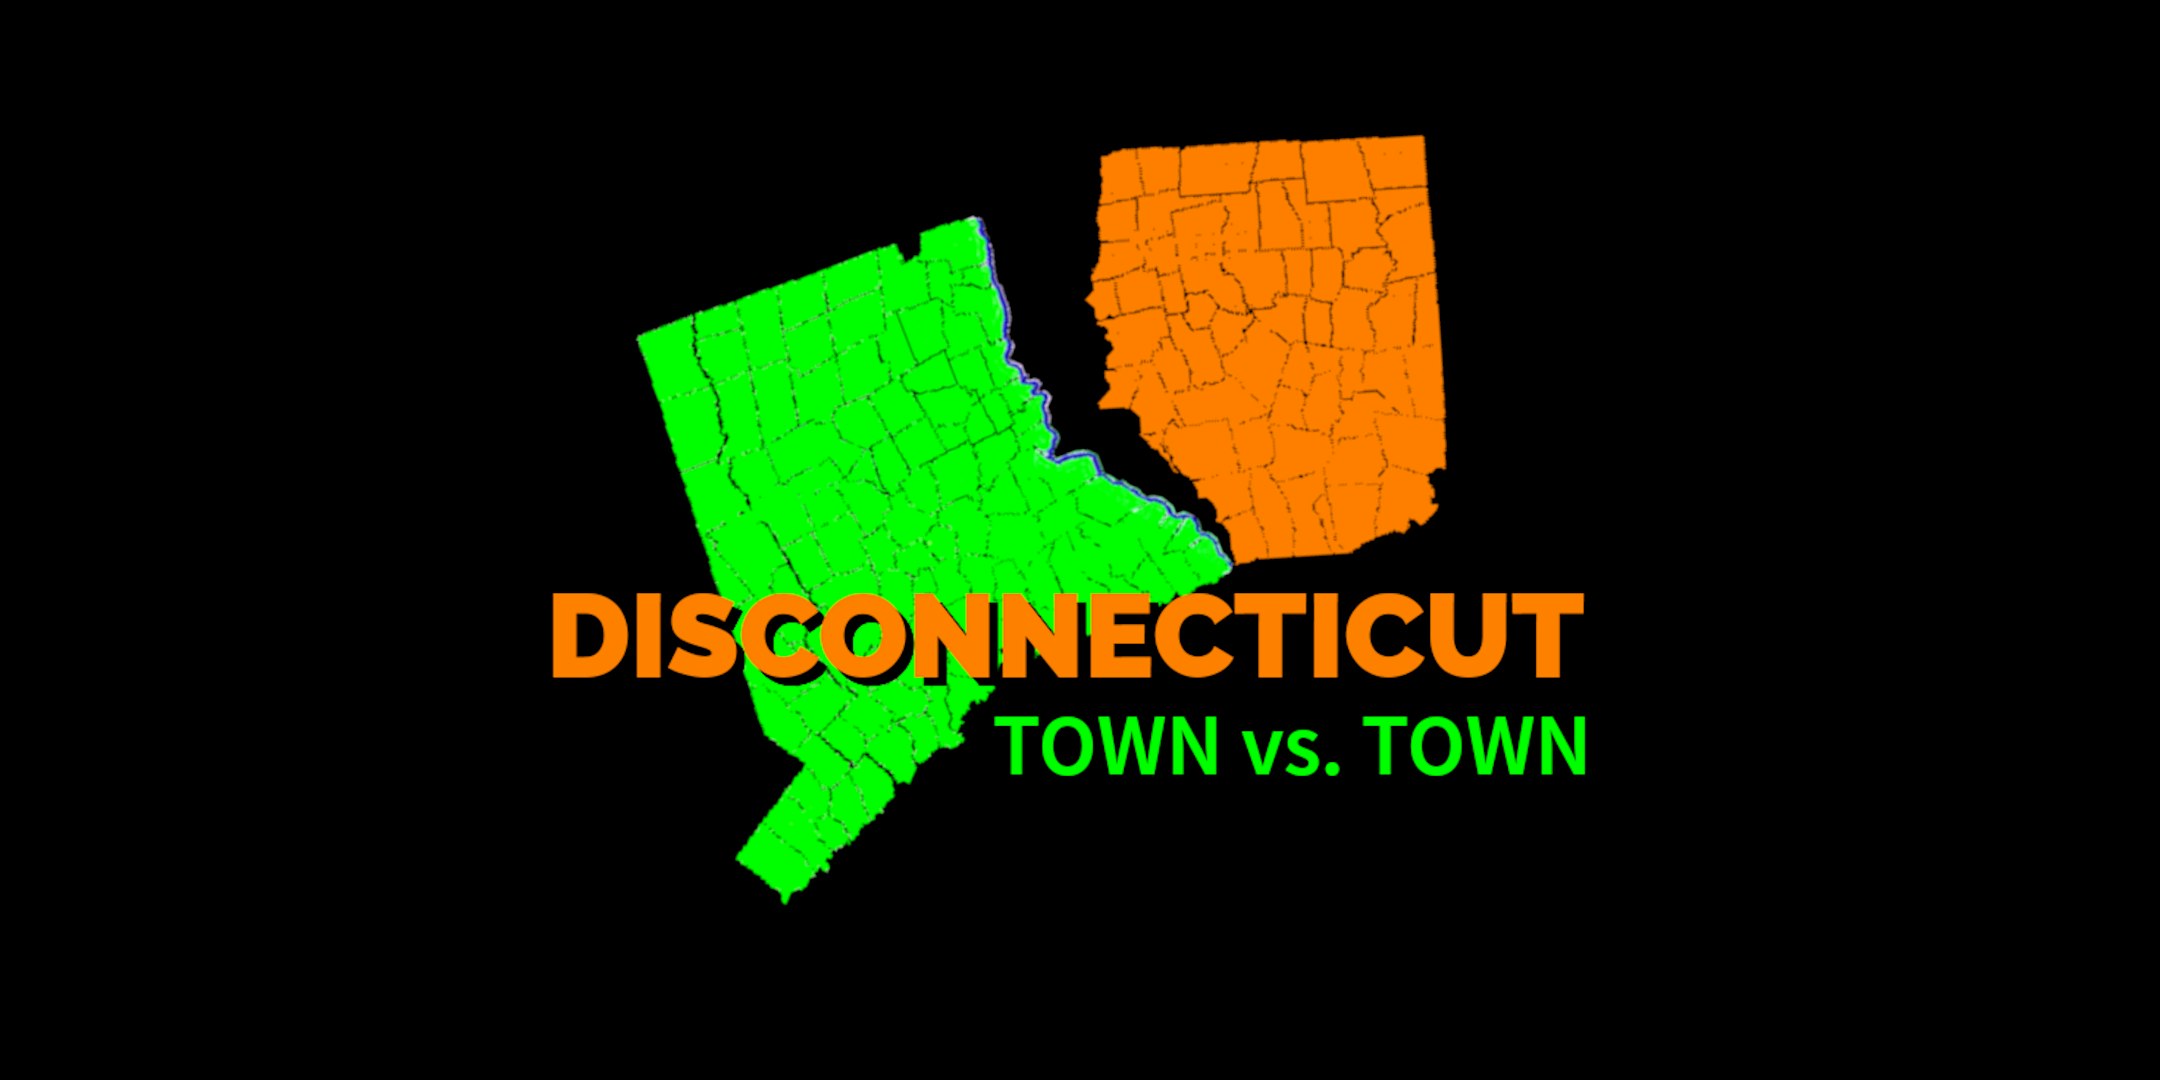 DISCONNECTICUT: Rocky Hill vs. Waterbury - An Improv Comedy Competition